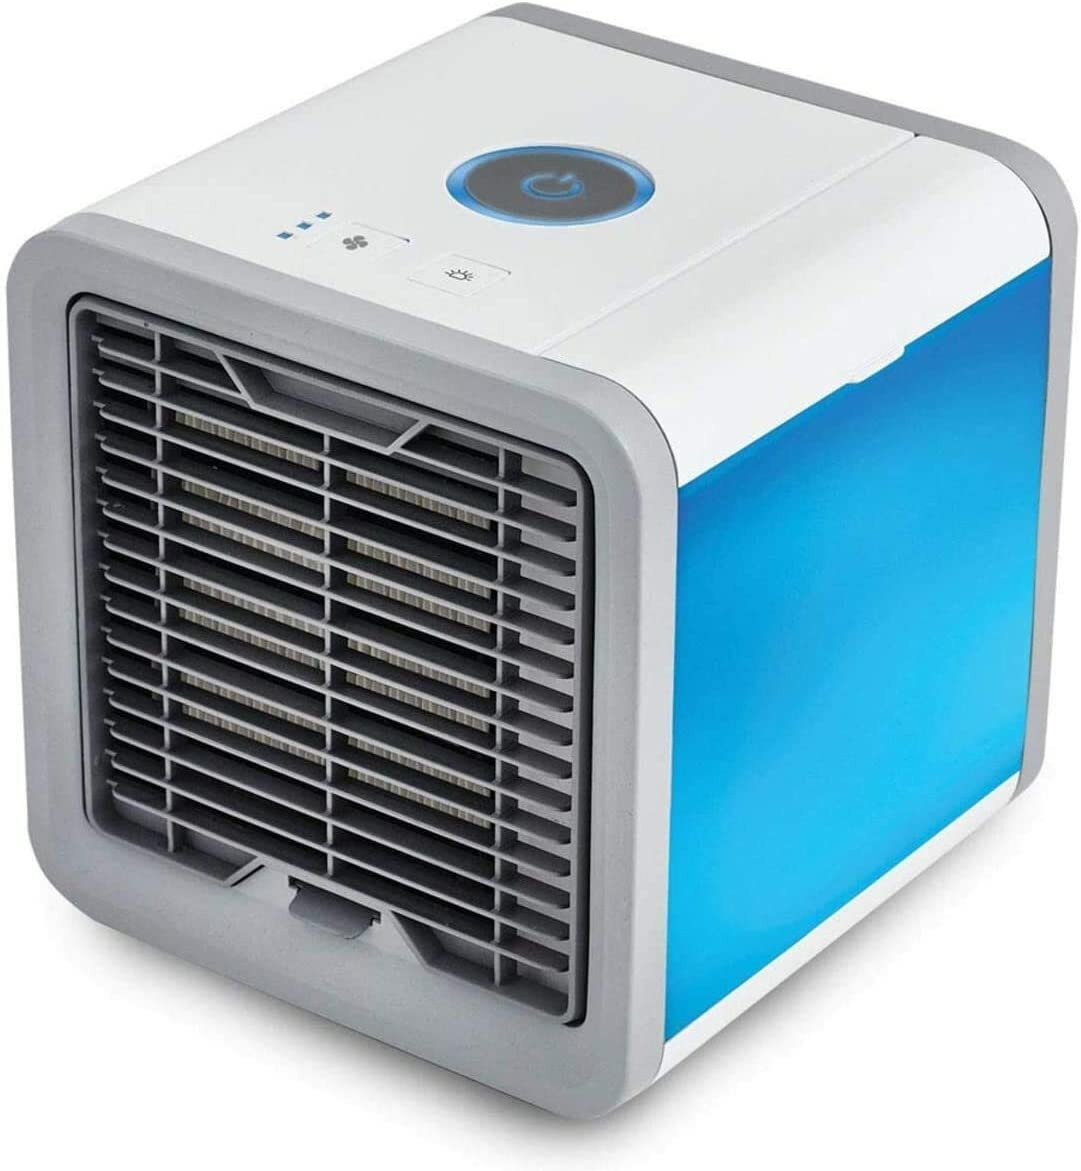 smallest portable air conditioner on the market